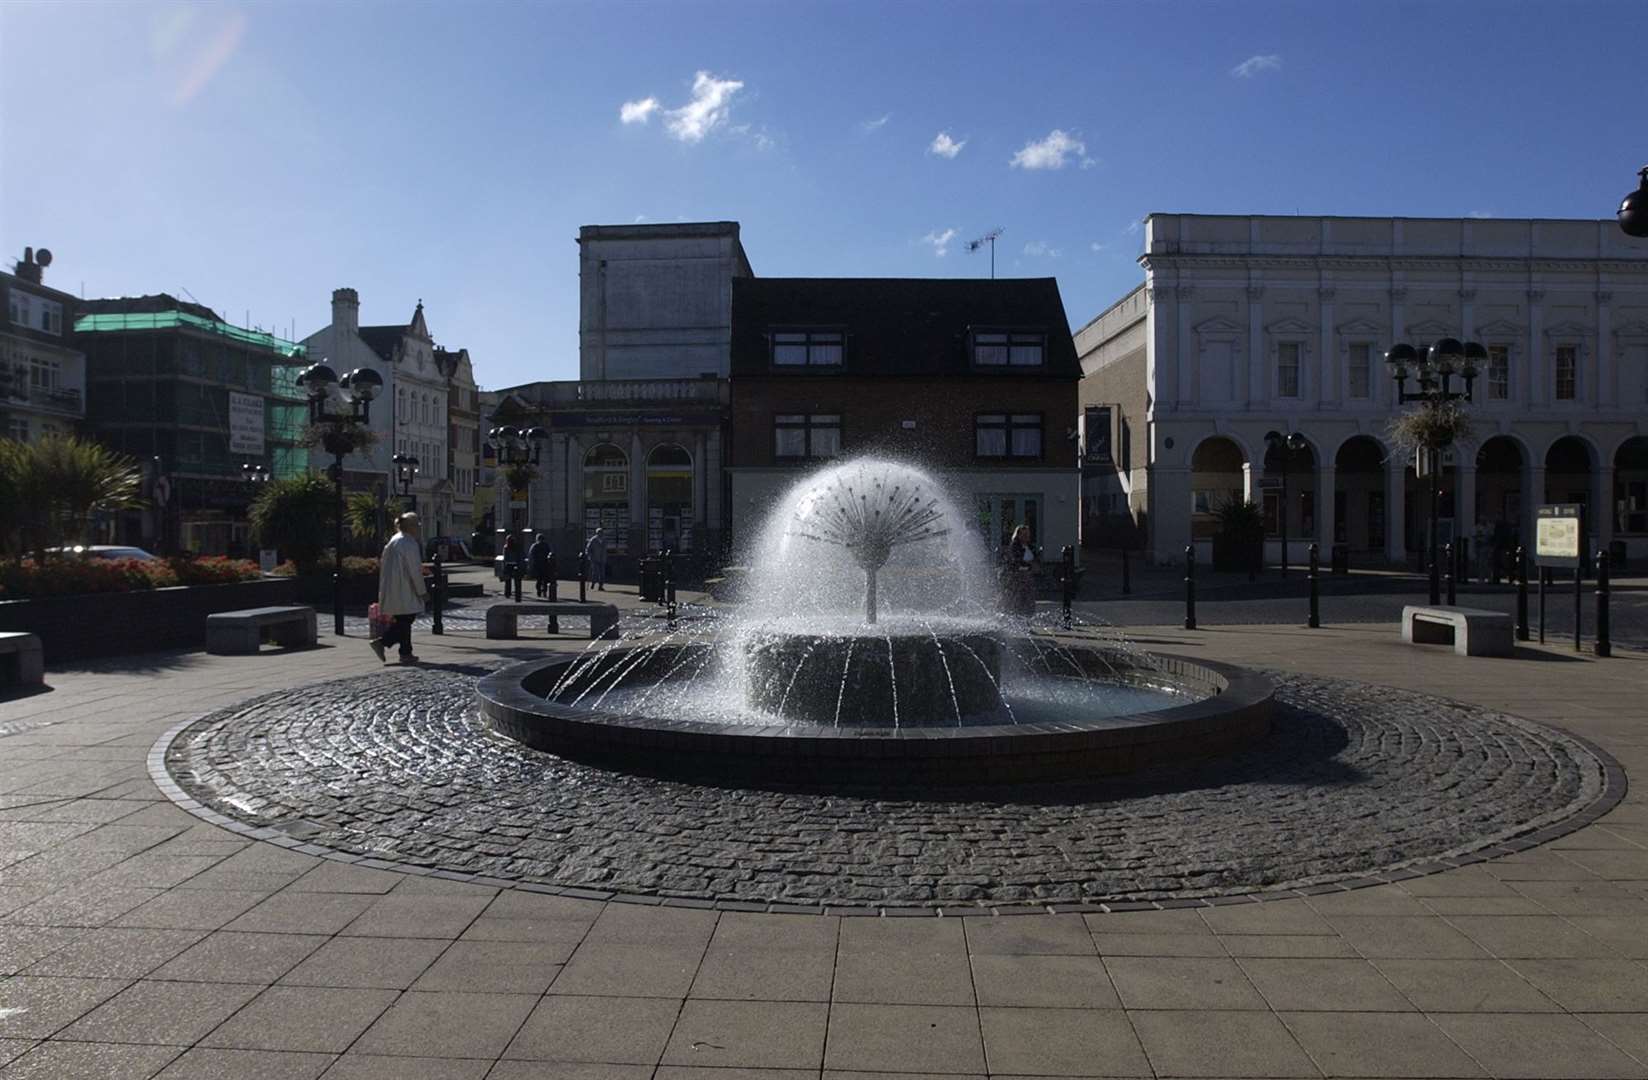 Market Square exactly 20 years ago, in 2002, when it had a fountain as a centrepiece. Picture: Derek Stingemore for KMG